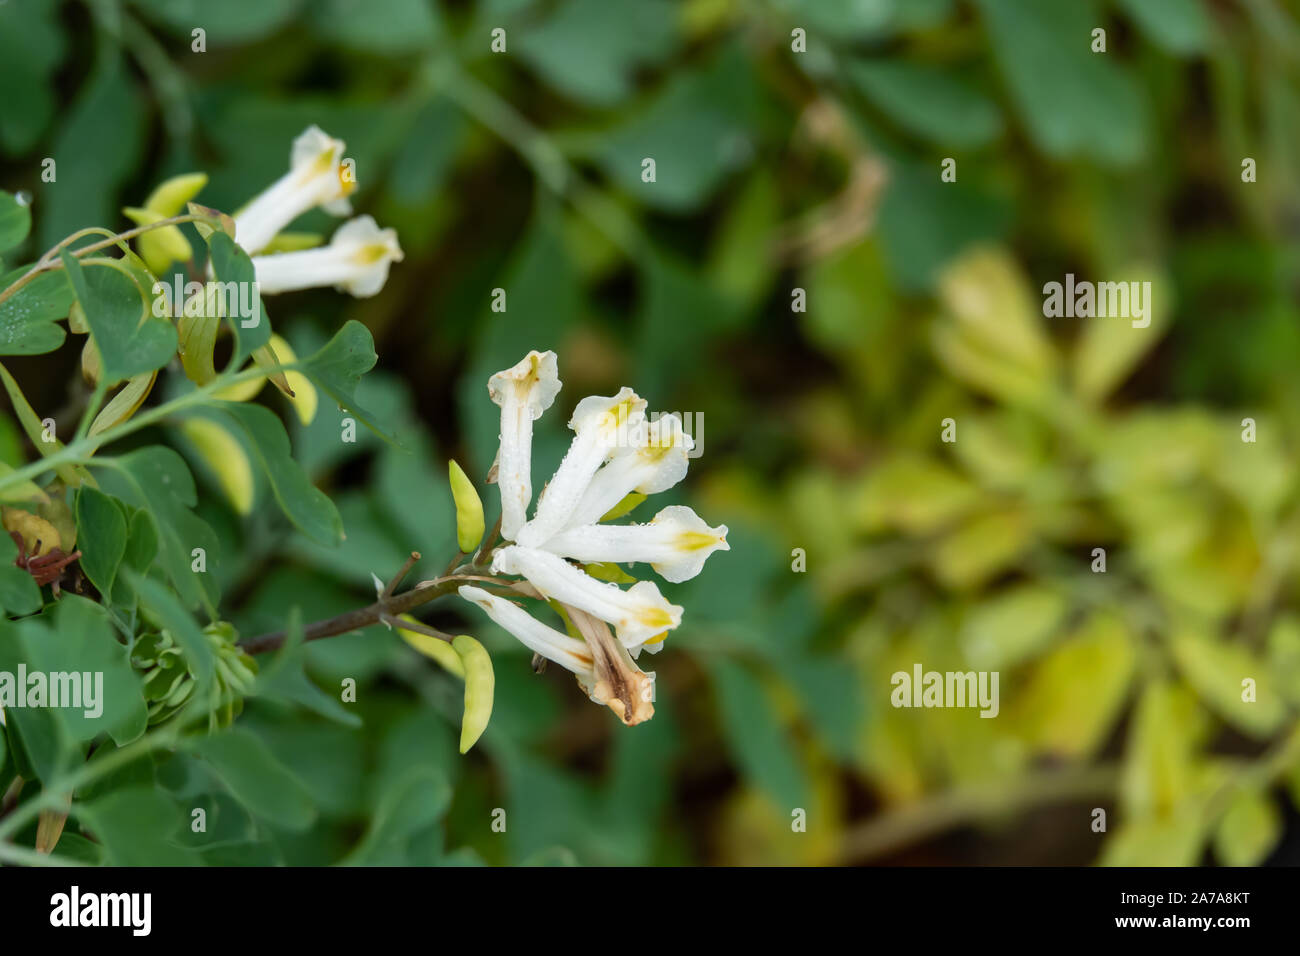 Pale Pseudofumaria Flowers in Bloom Stock Photo